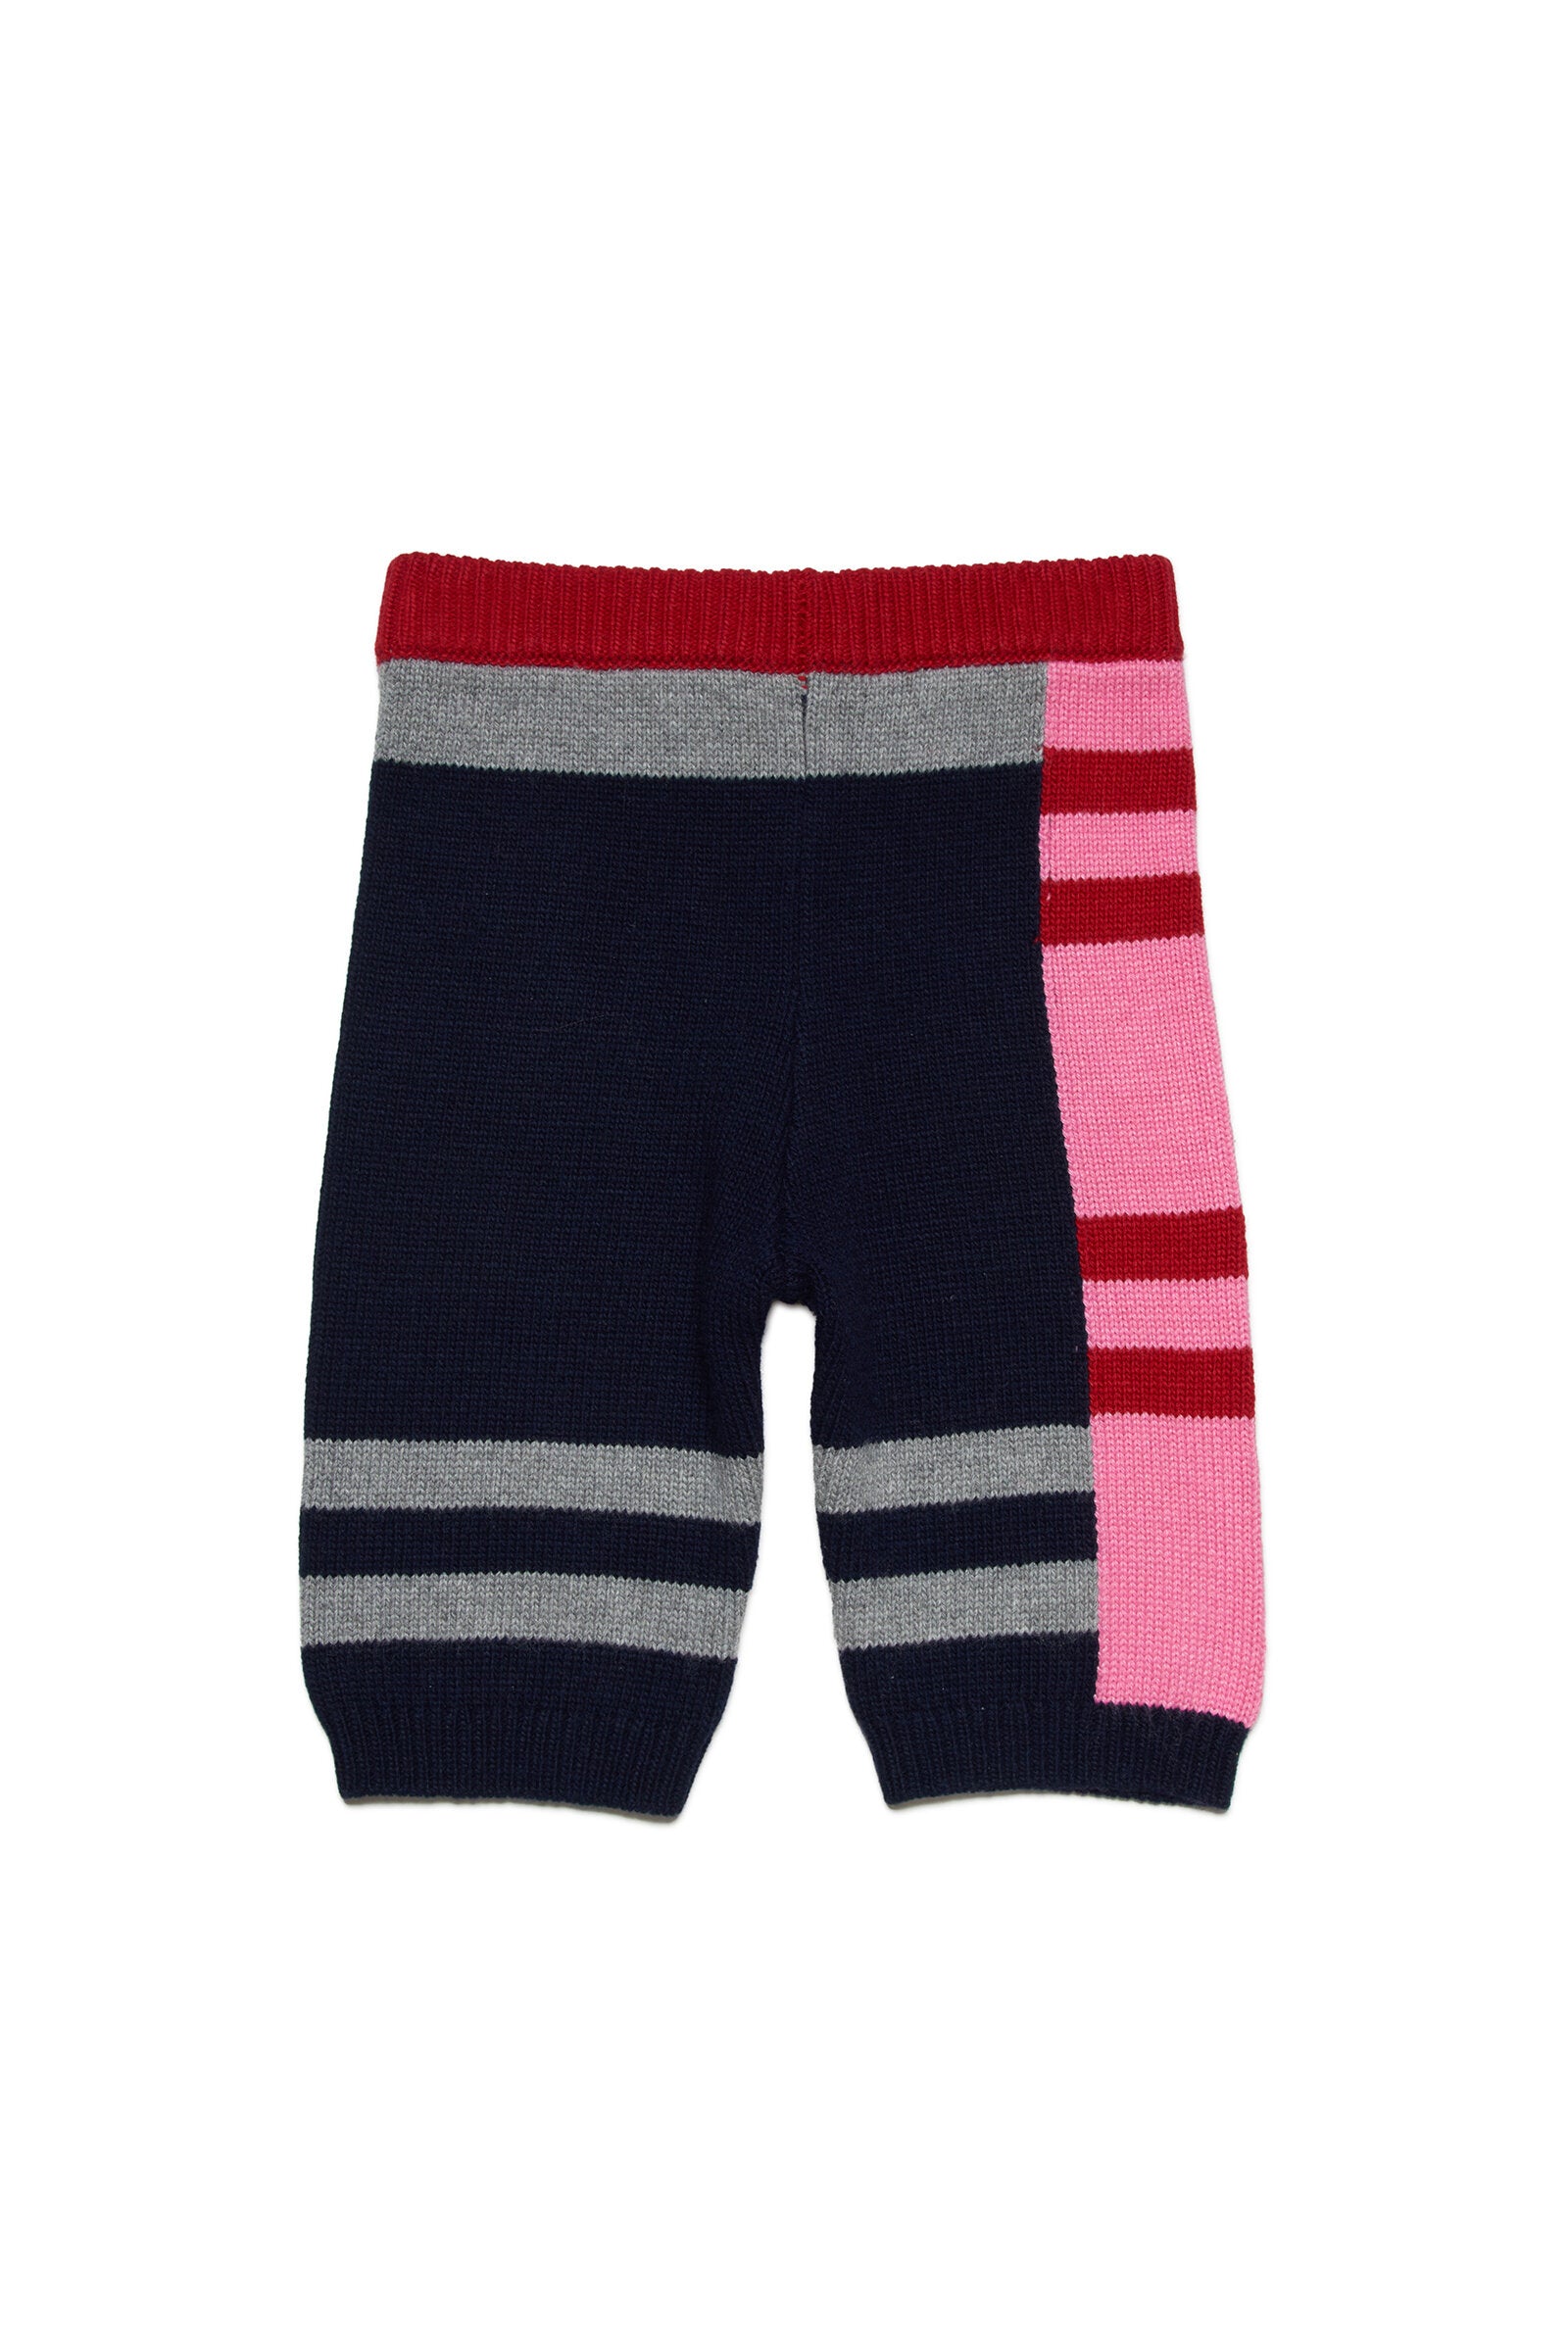 Multicolor wool-blend shorts